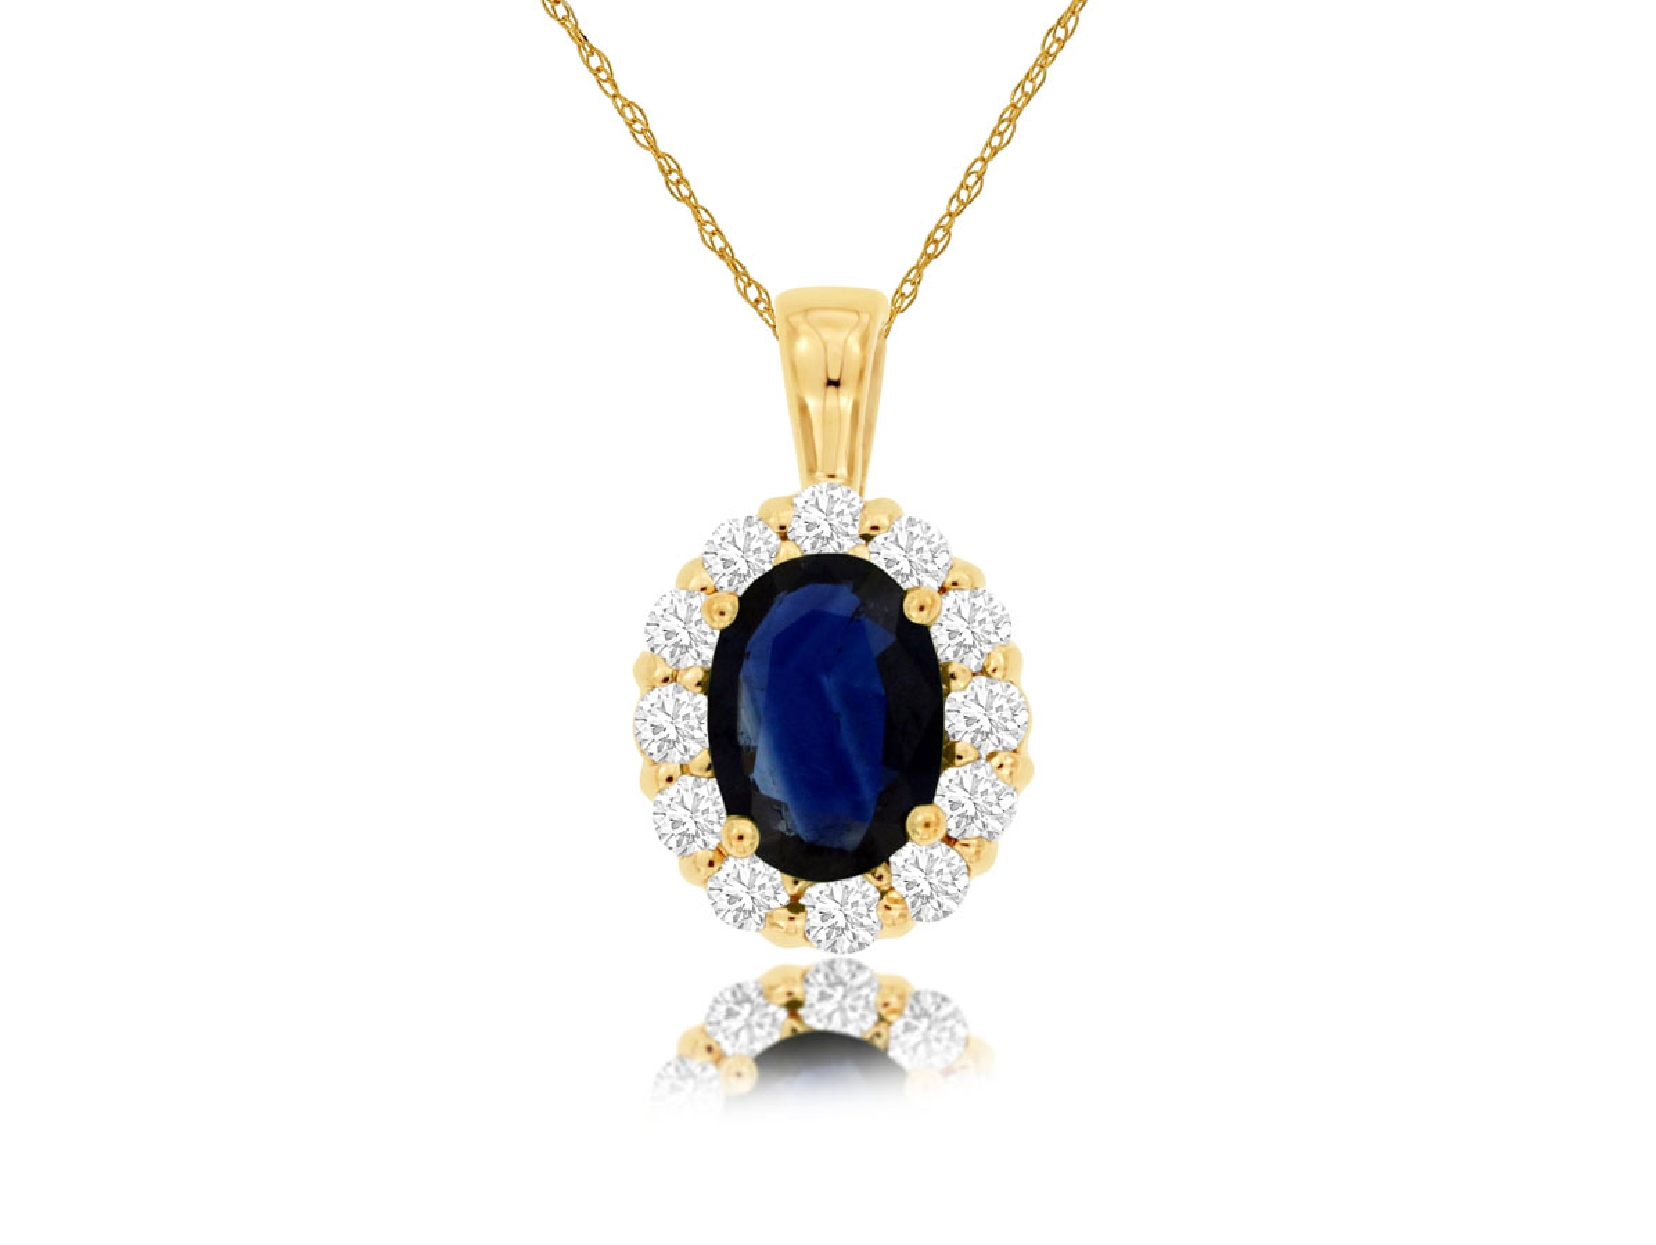 14K Yellow Gold Sapphire Necklace with Diamond Halo

1.00ct Sapphire
.30ct Diamonds
18 Inches